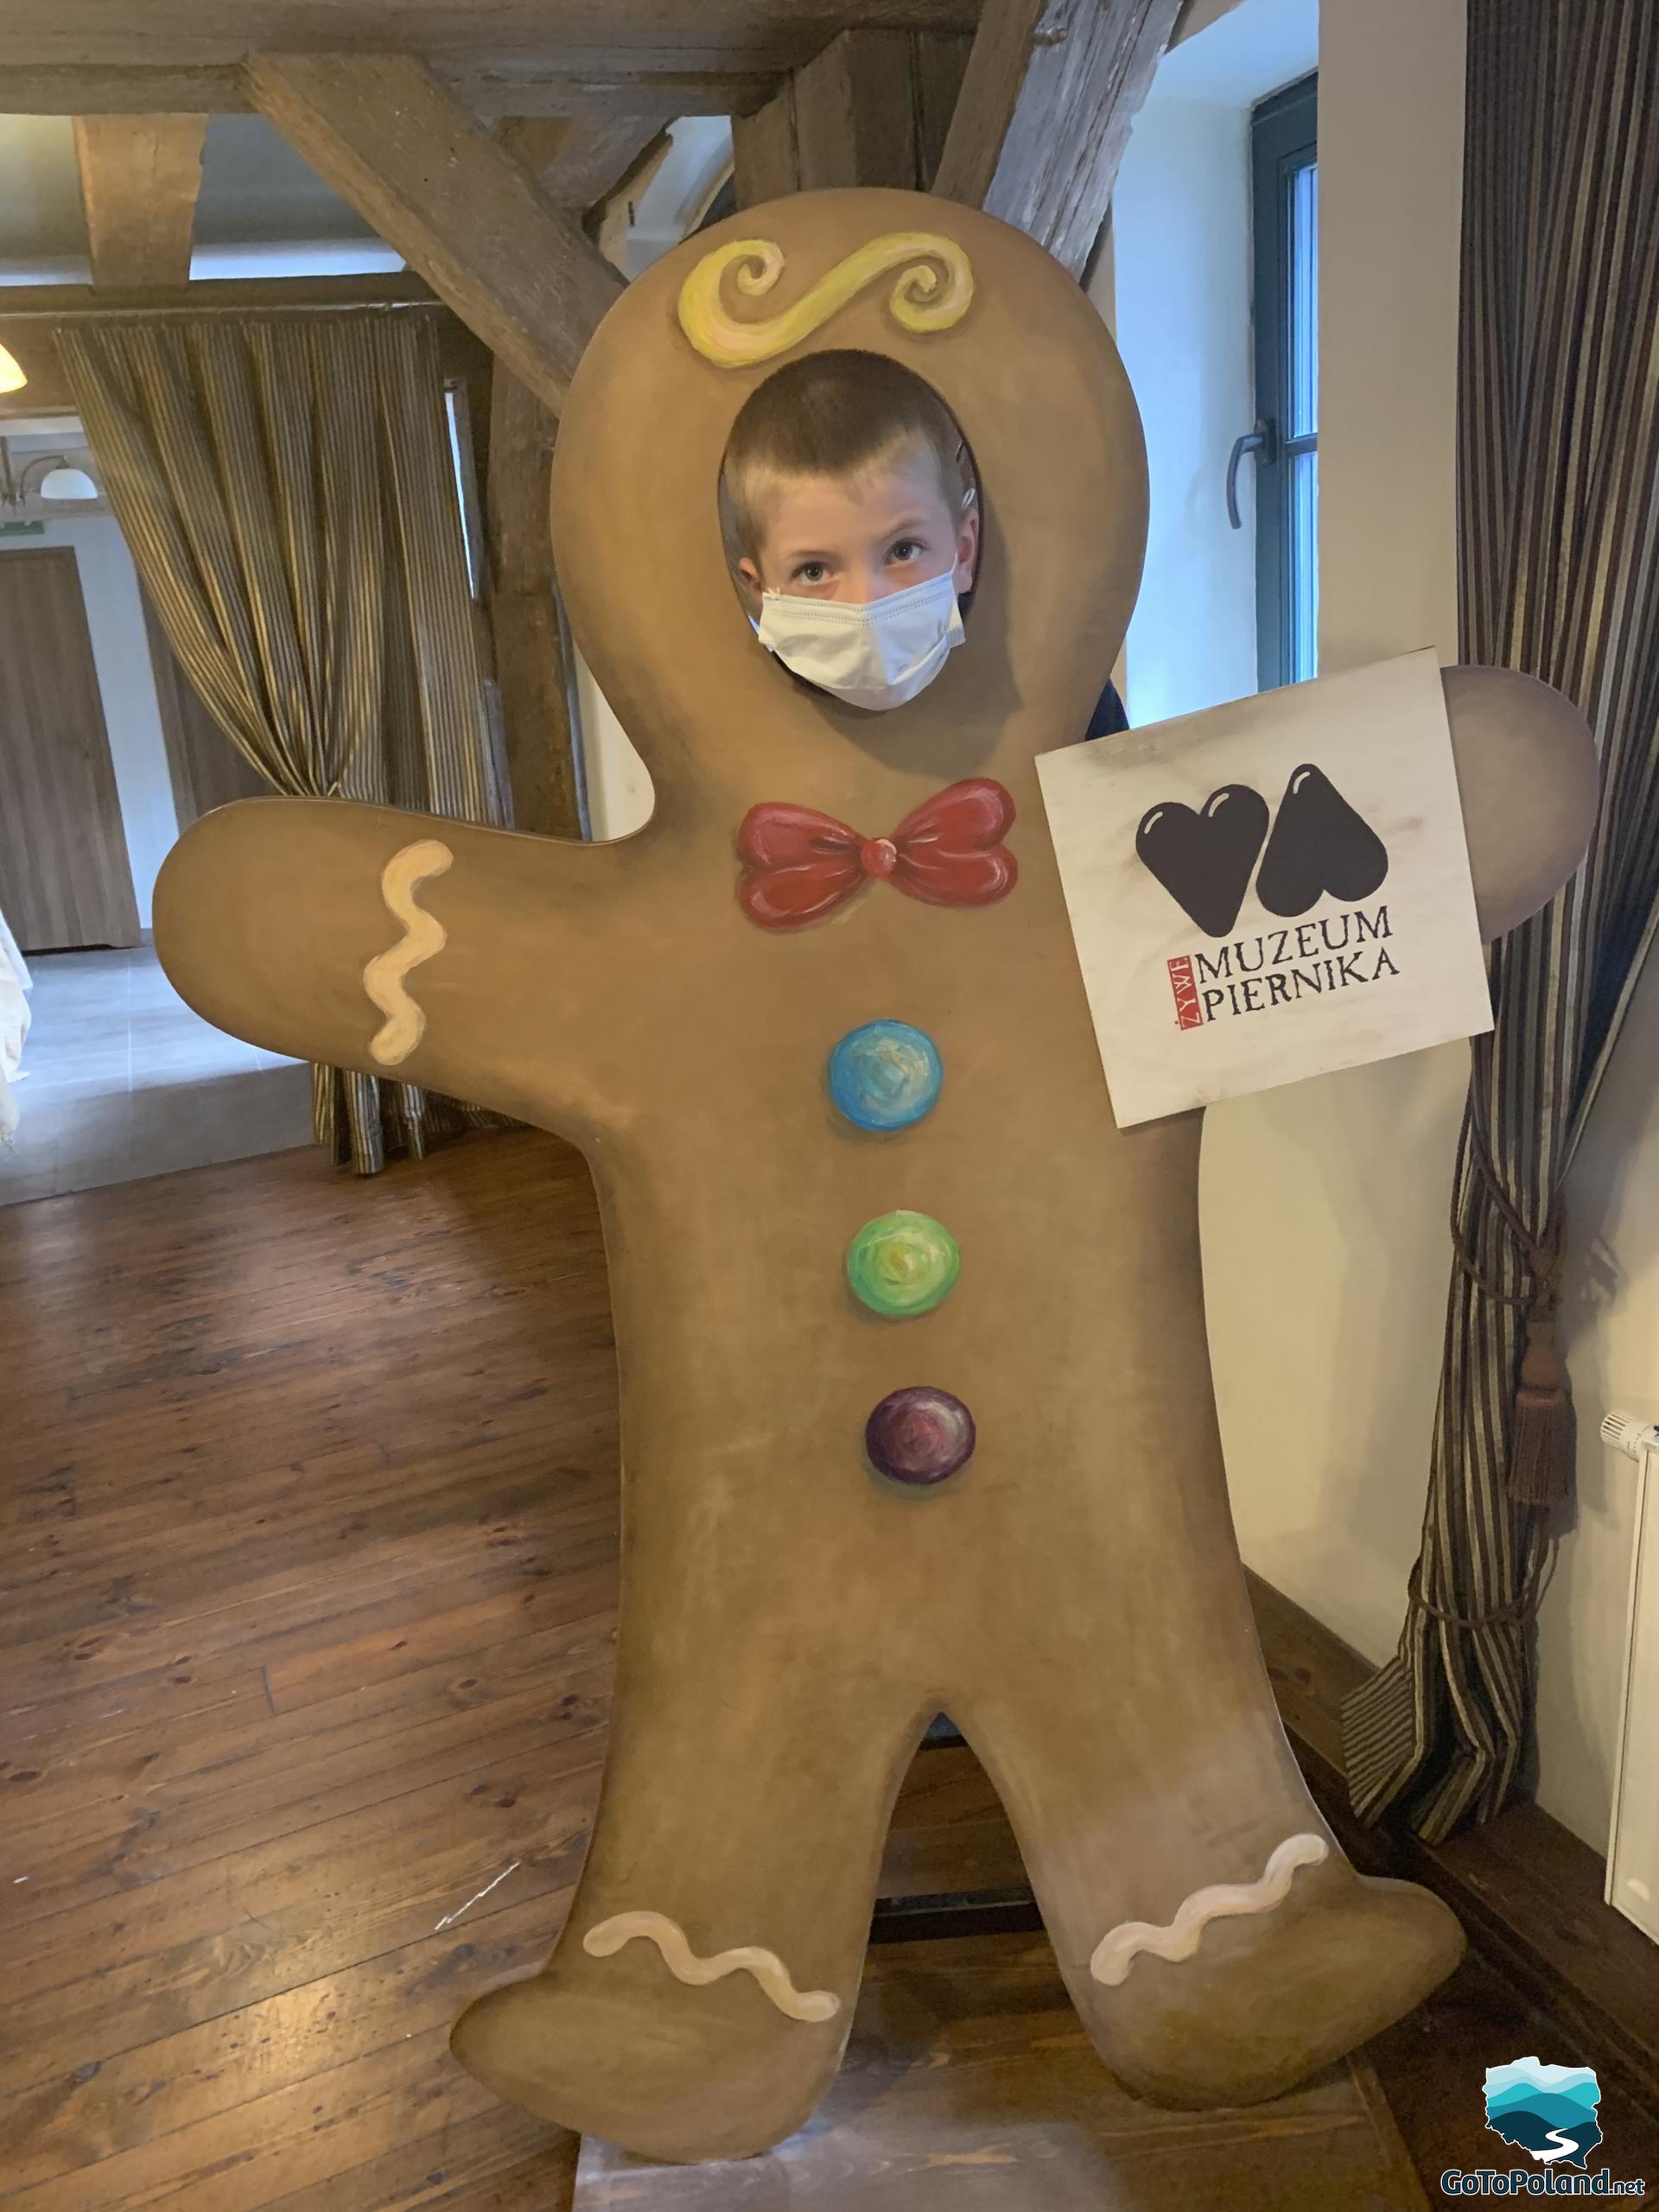 the boy is standing behind a gingerbread man made of cardboard and sticking his head out for a photo